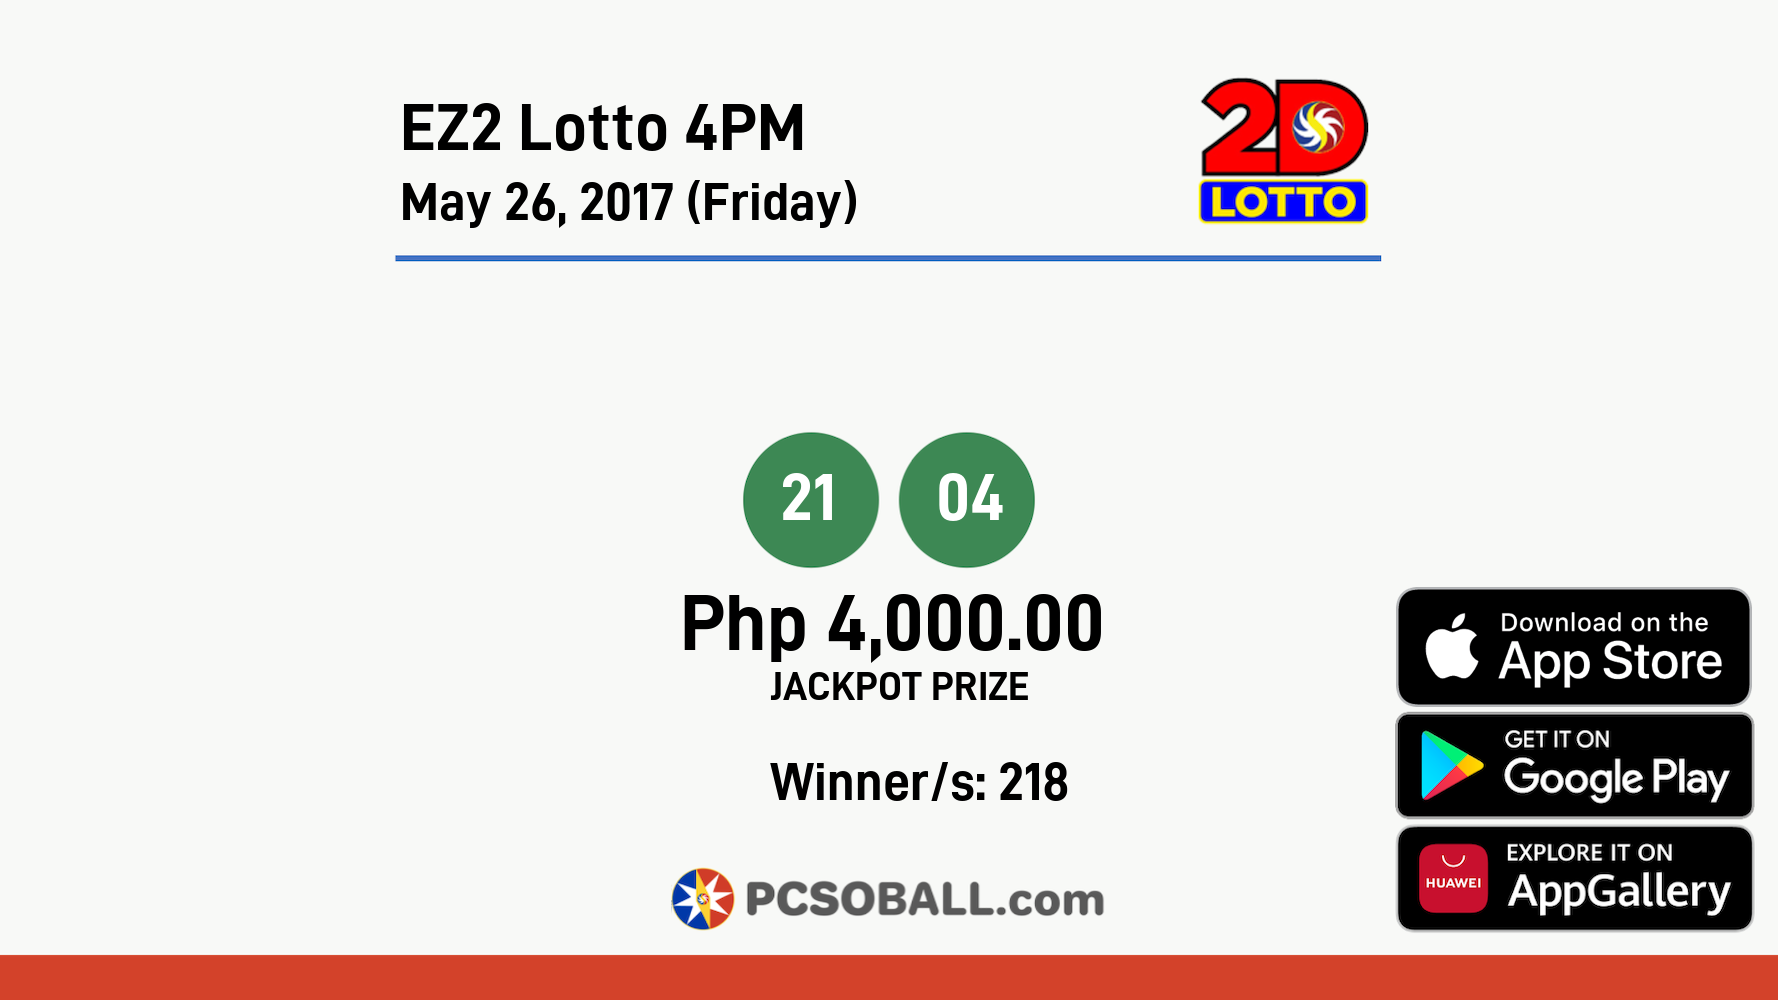 EZ2 Lotto 4PM May 26, 2017 (Friday) Result